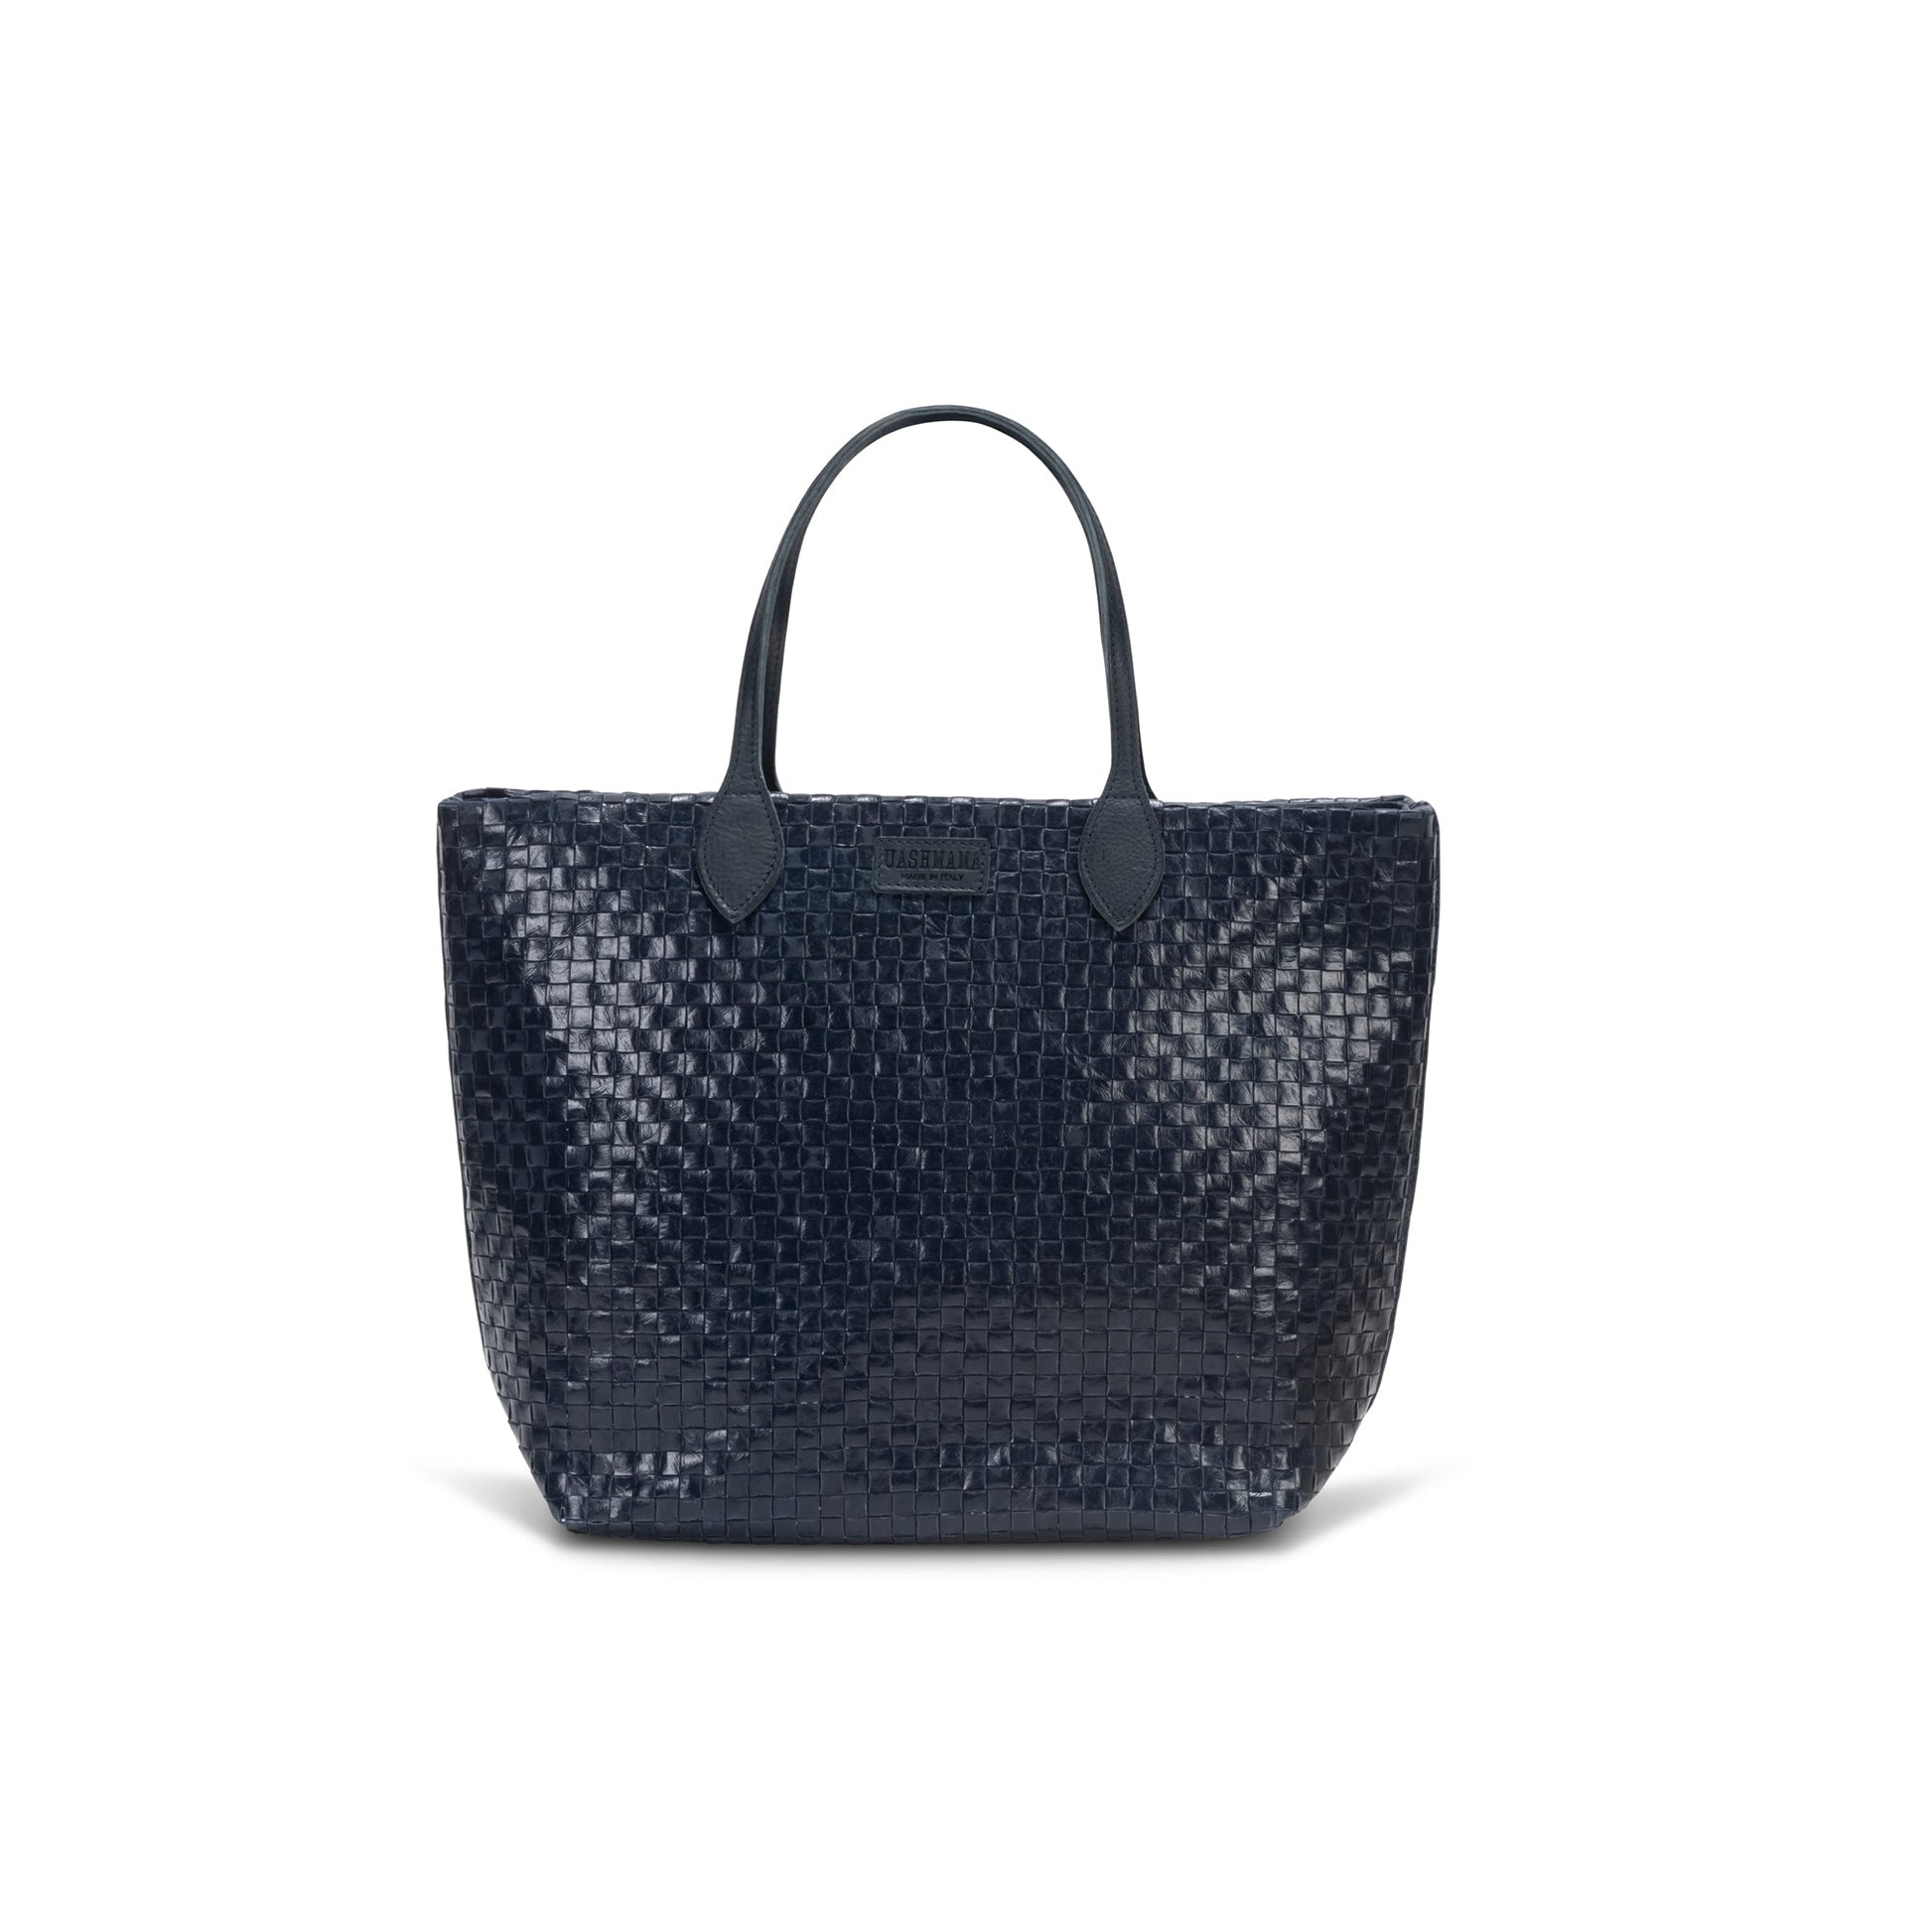 A large washable paper woven tote is shown. It has two long leather handles and a leather UASHMAMA logo label on the outside in between the handles. The bag shown is in a dark blue colour.